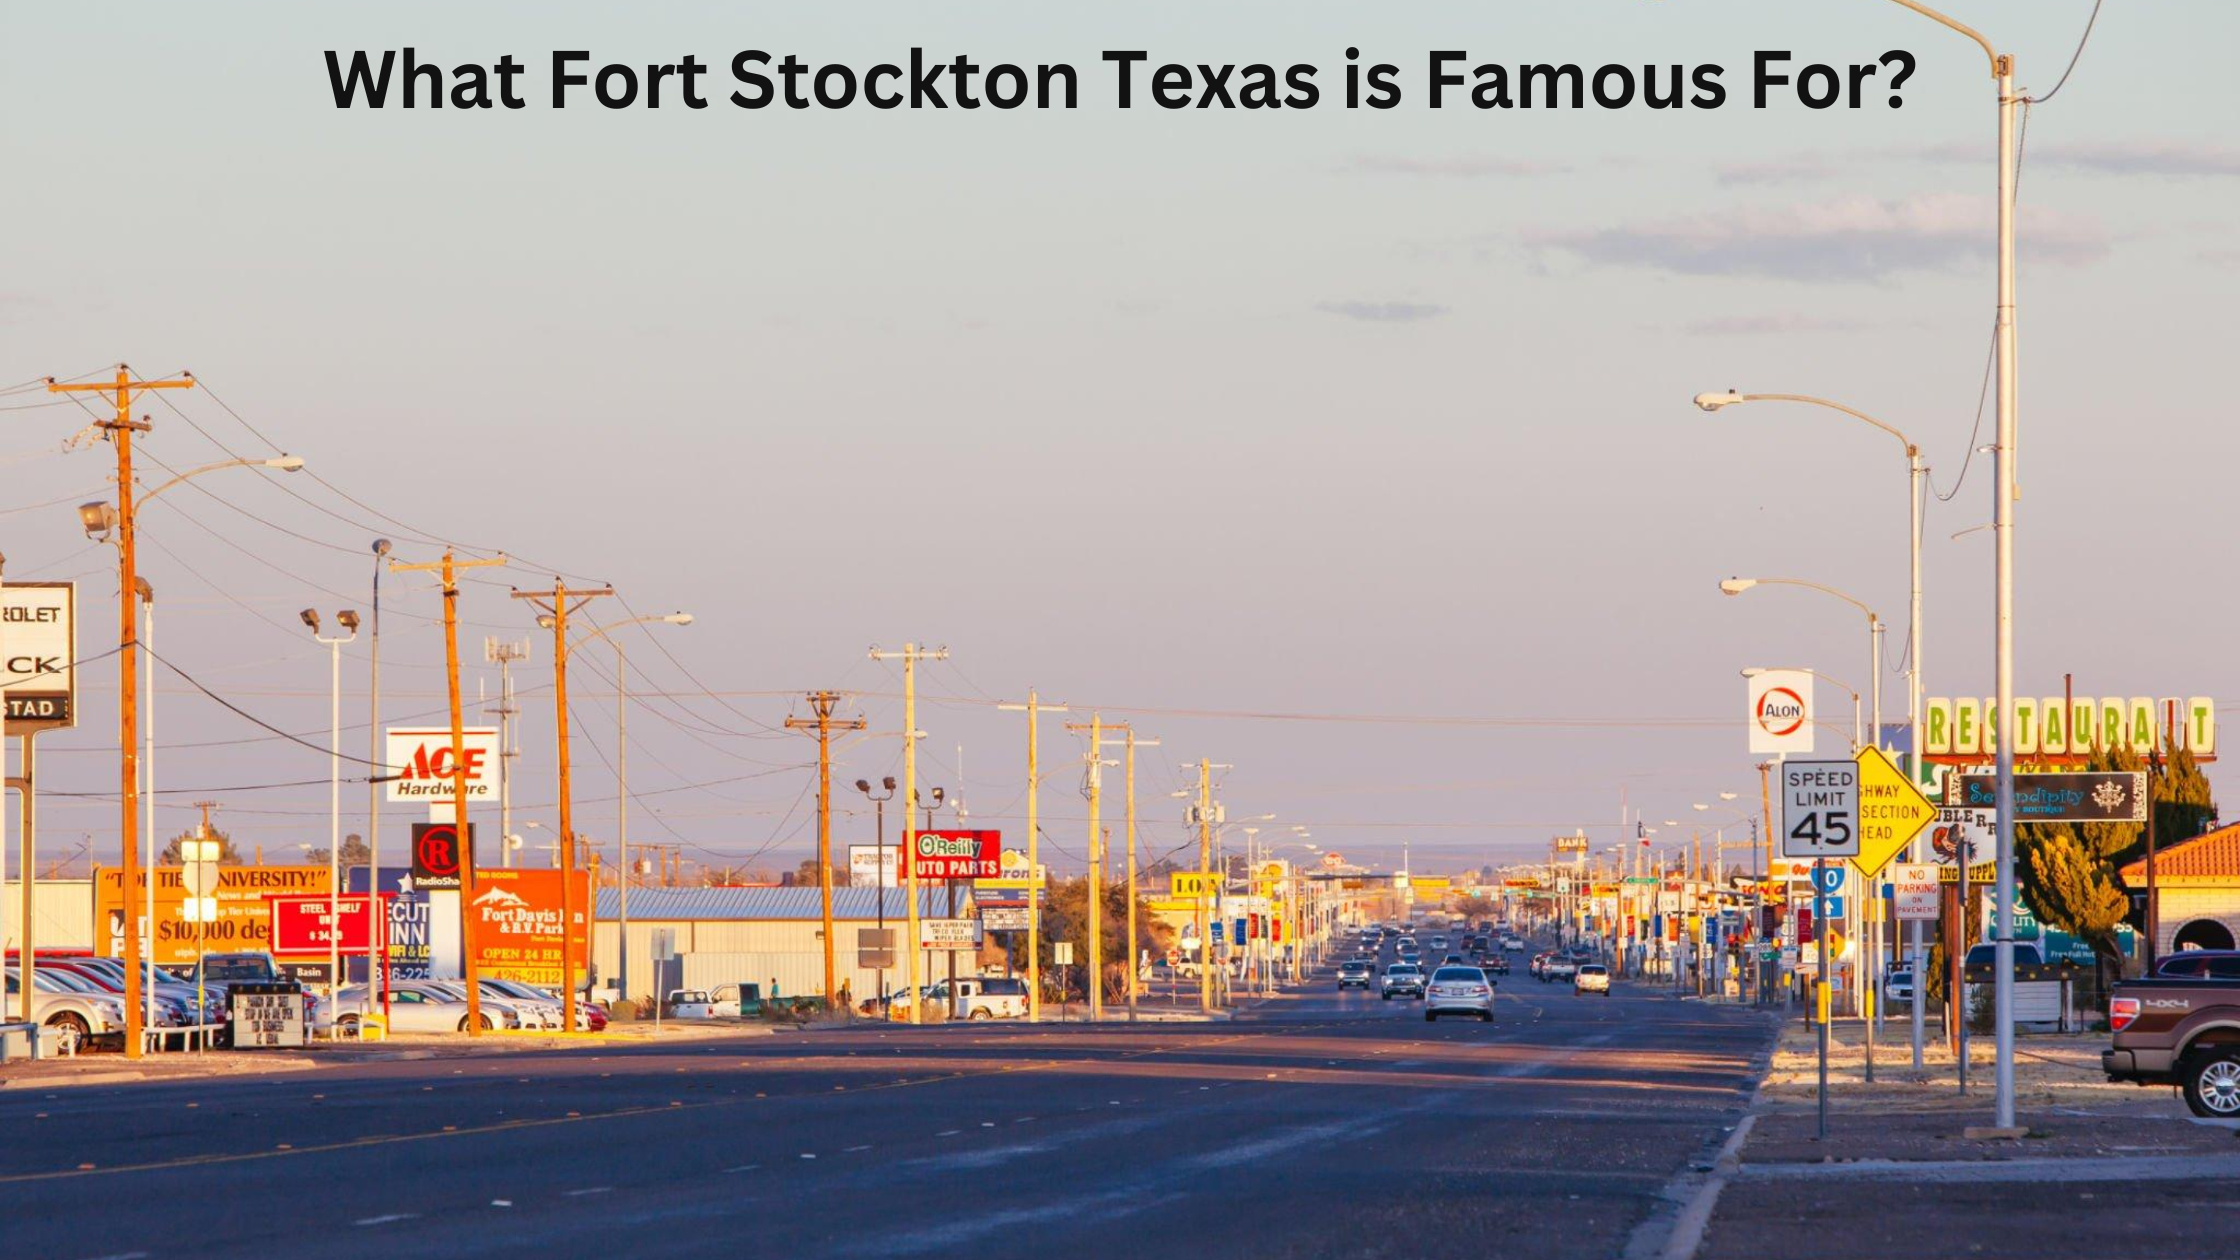 What Fort Stockton Texas is Famous For